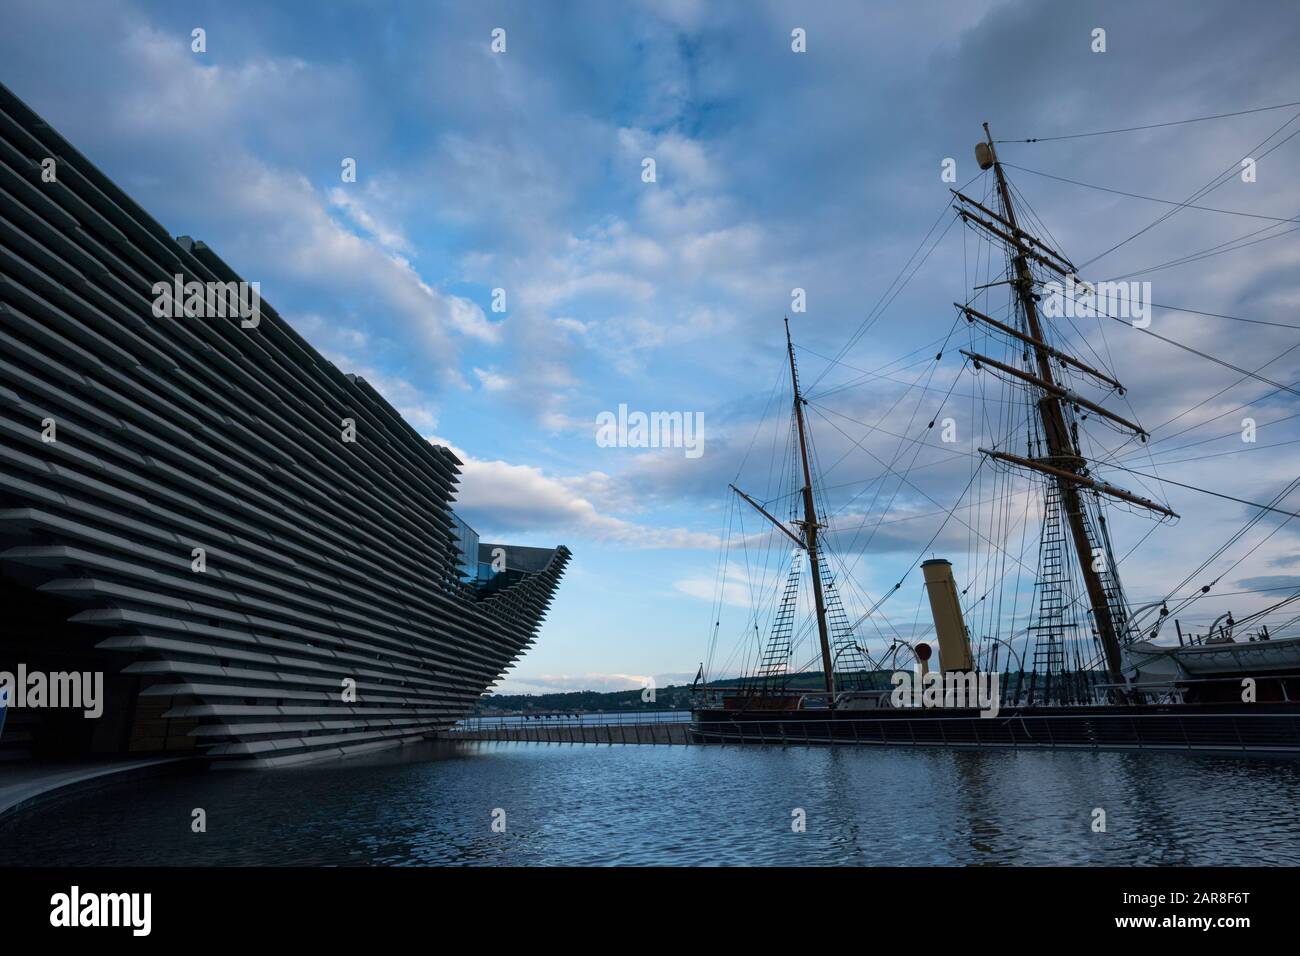 Dundee, United Kingdom - June 19, 2019: The restored RRS Discovery ship that Captain Scott sailed to Antarctic with Shackelton sits in the water next Stock Photo